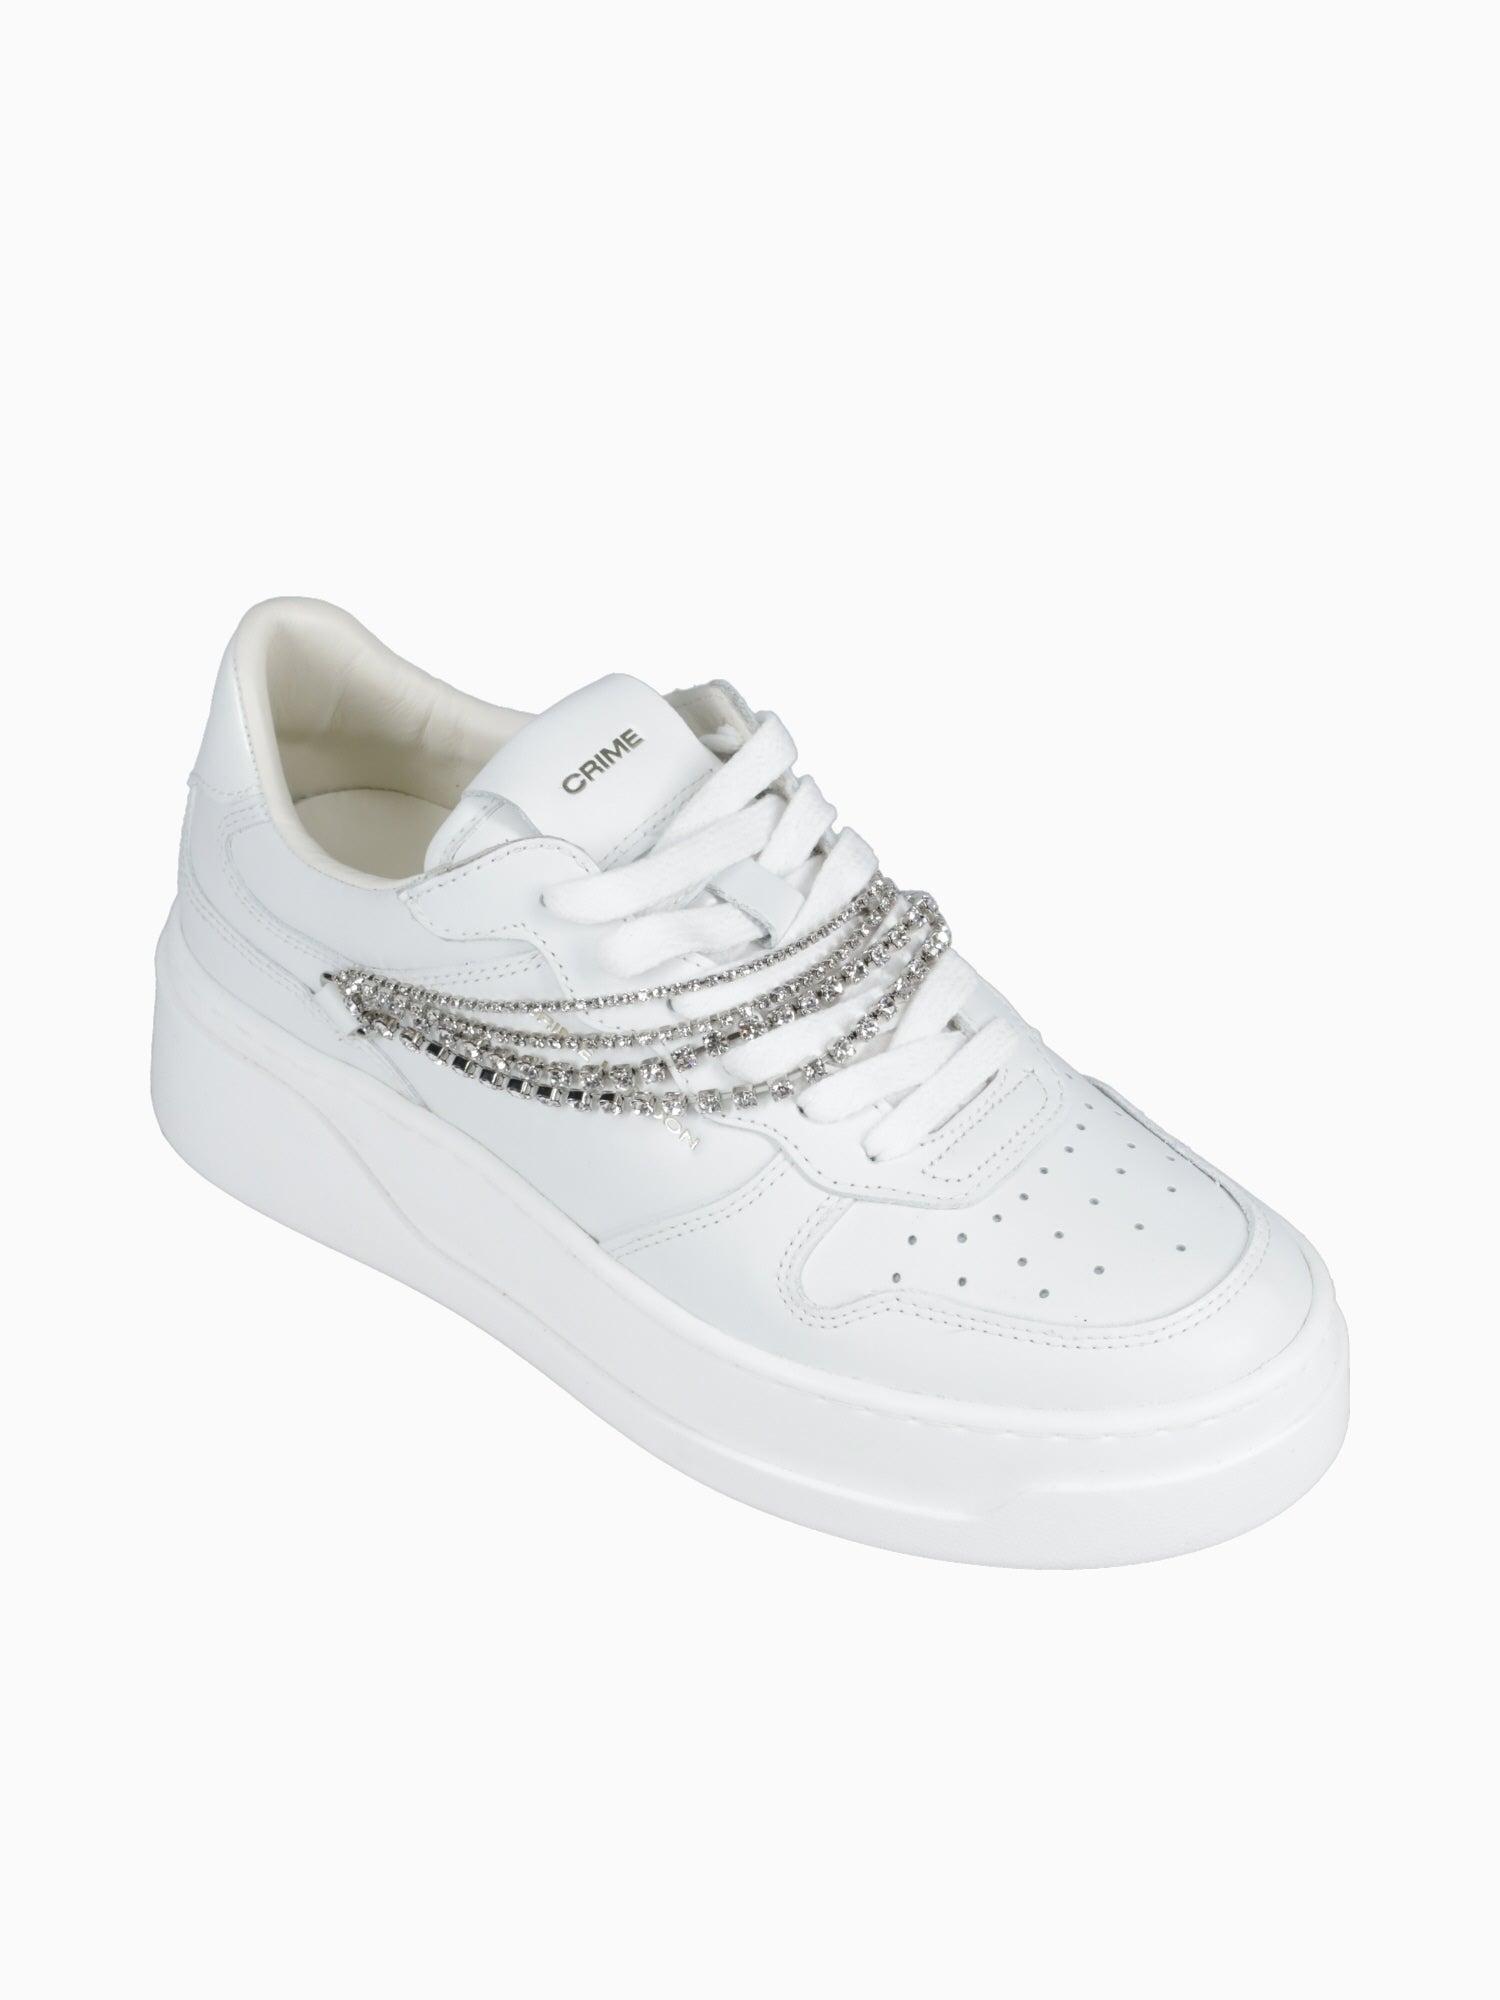 Crime Force 1 White Leather